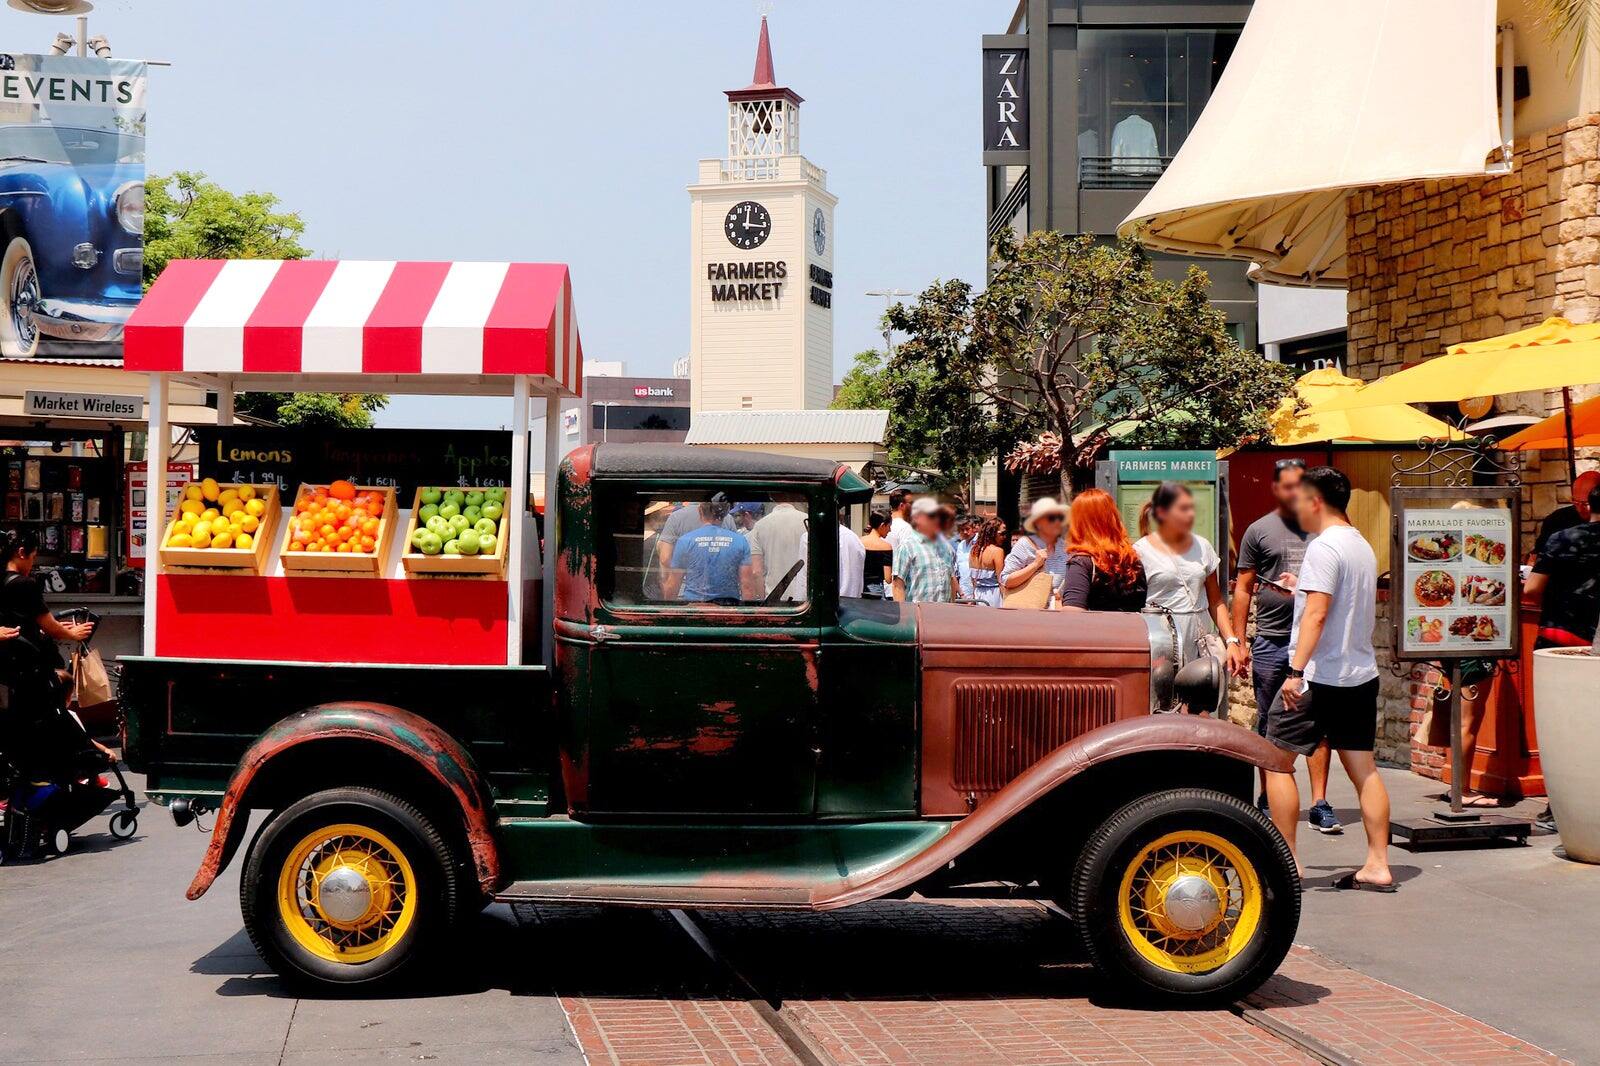 14-extraordinary-facts-about-the-original-farmers-market-los-angeles